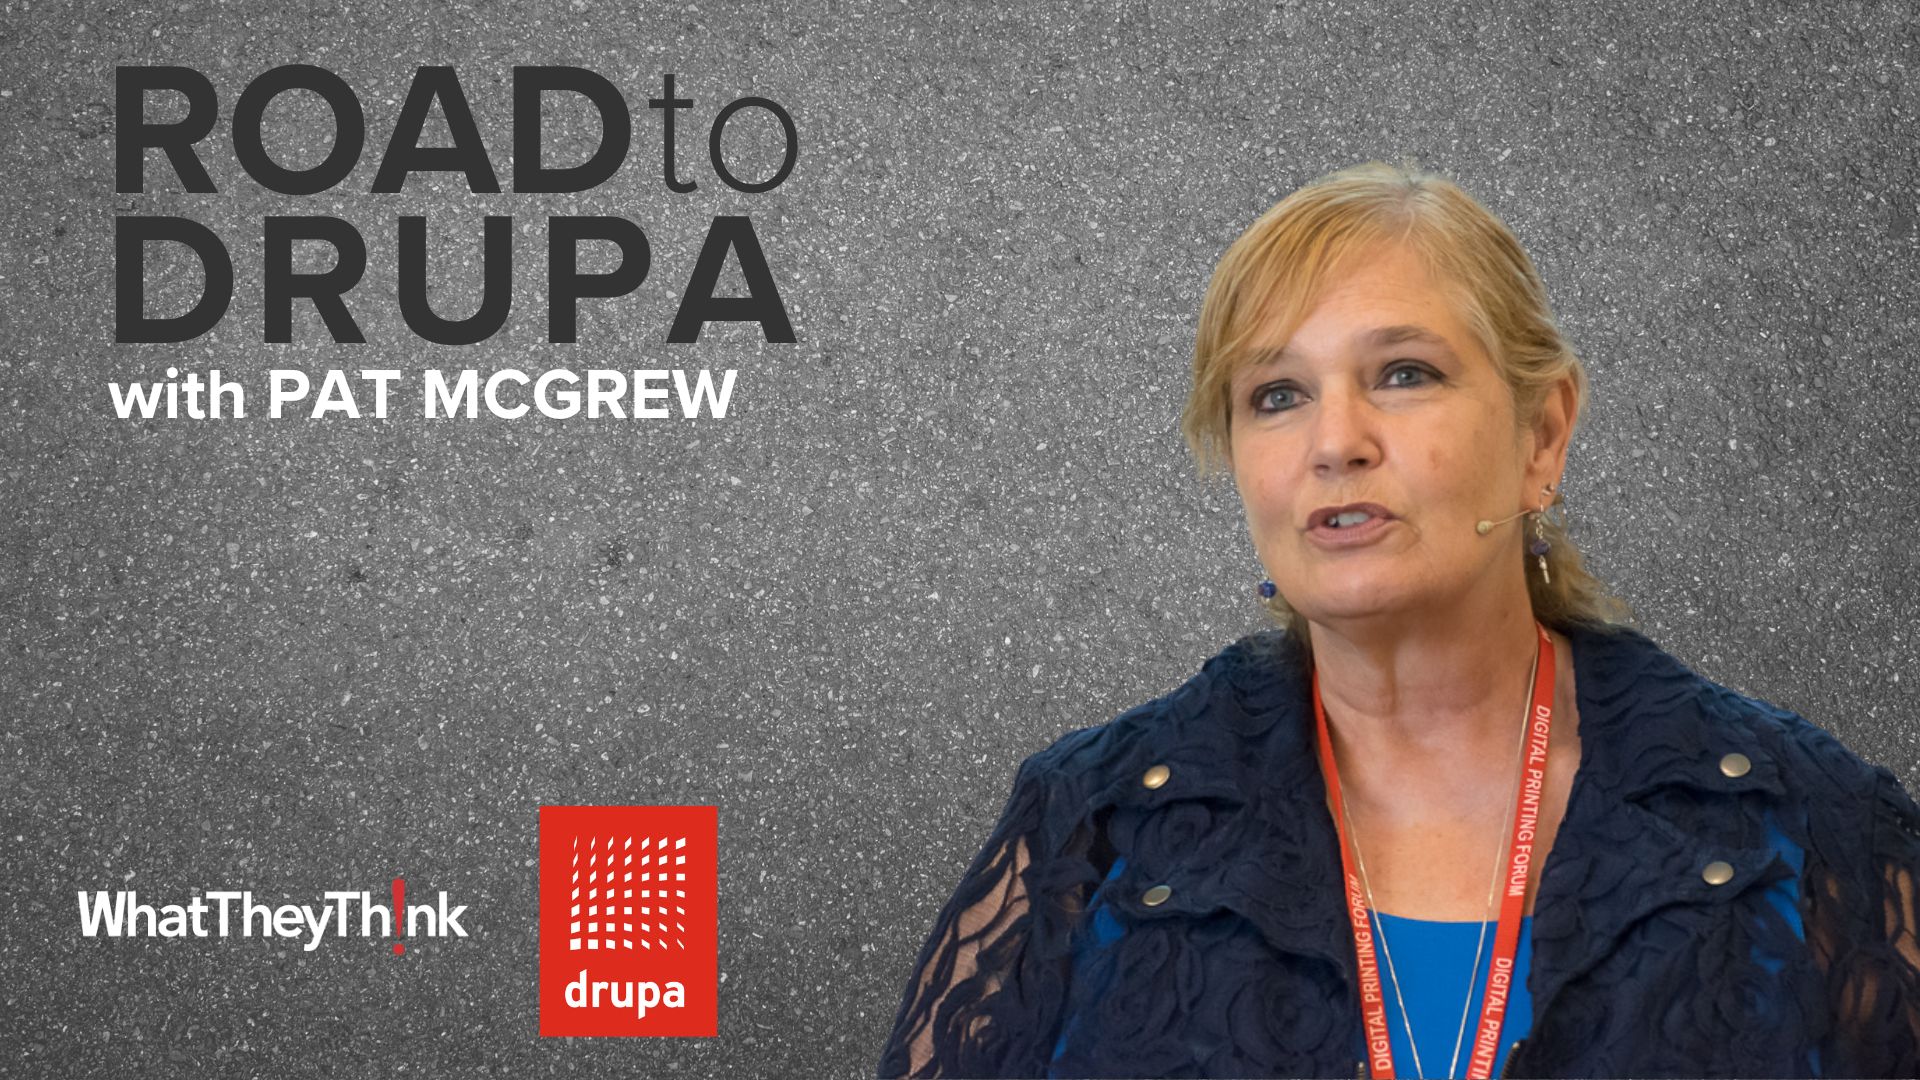 The Road to drupa: Pat McGrew Identifies Automation as the Hot Topic